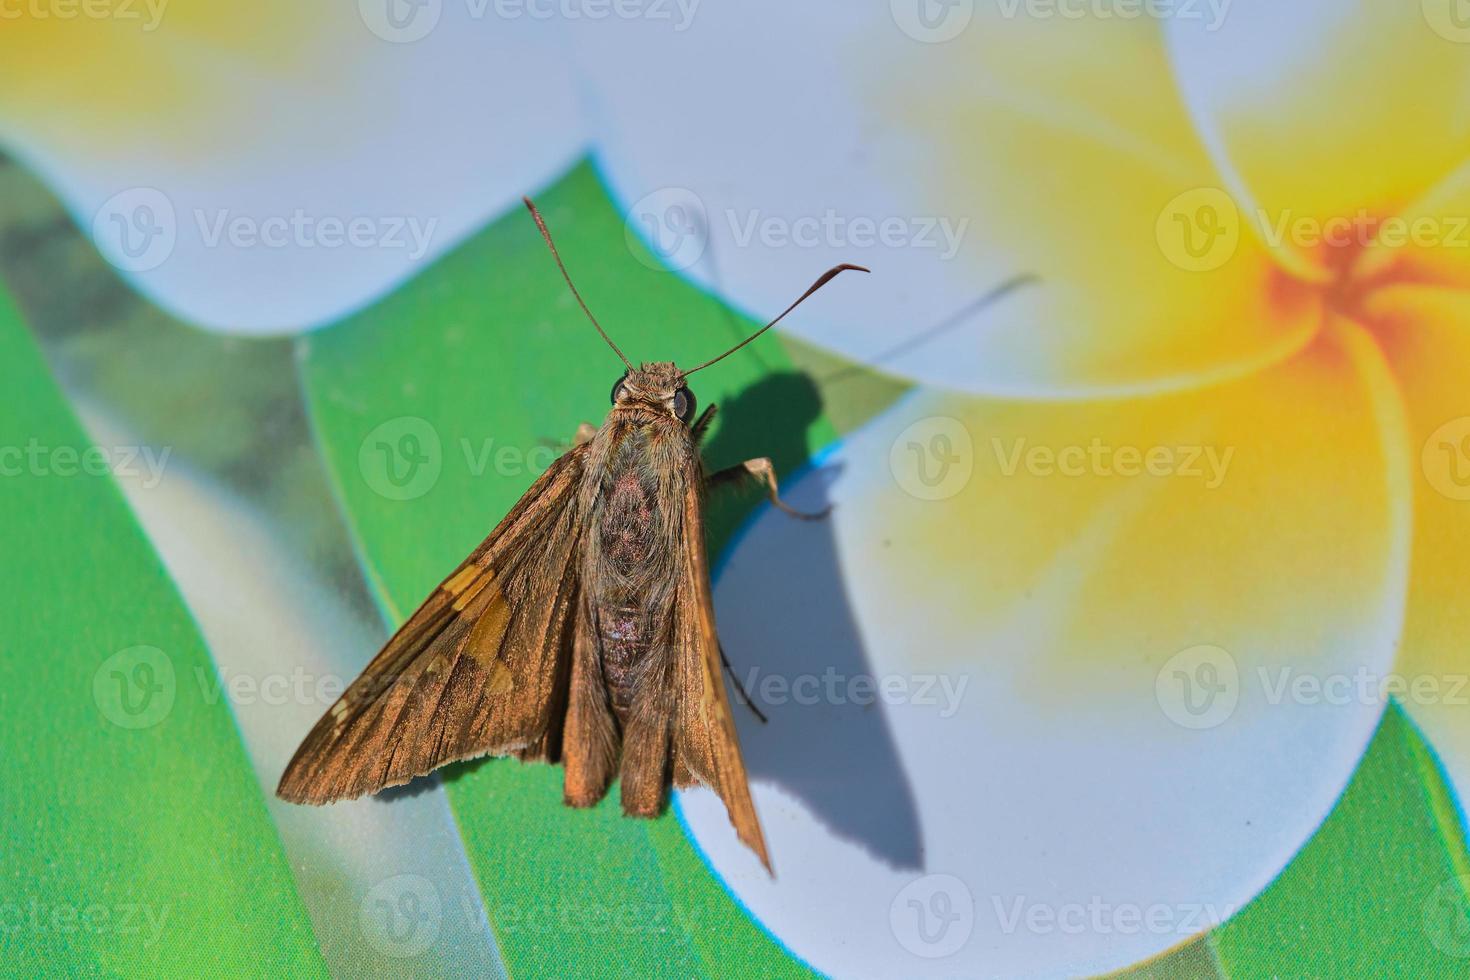 Silver-spotted skipper butterfly during an Ohio summer photo